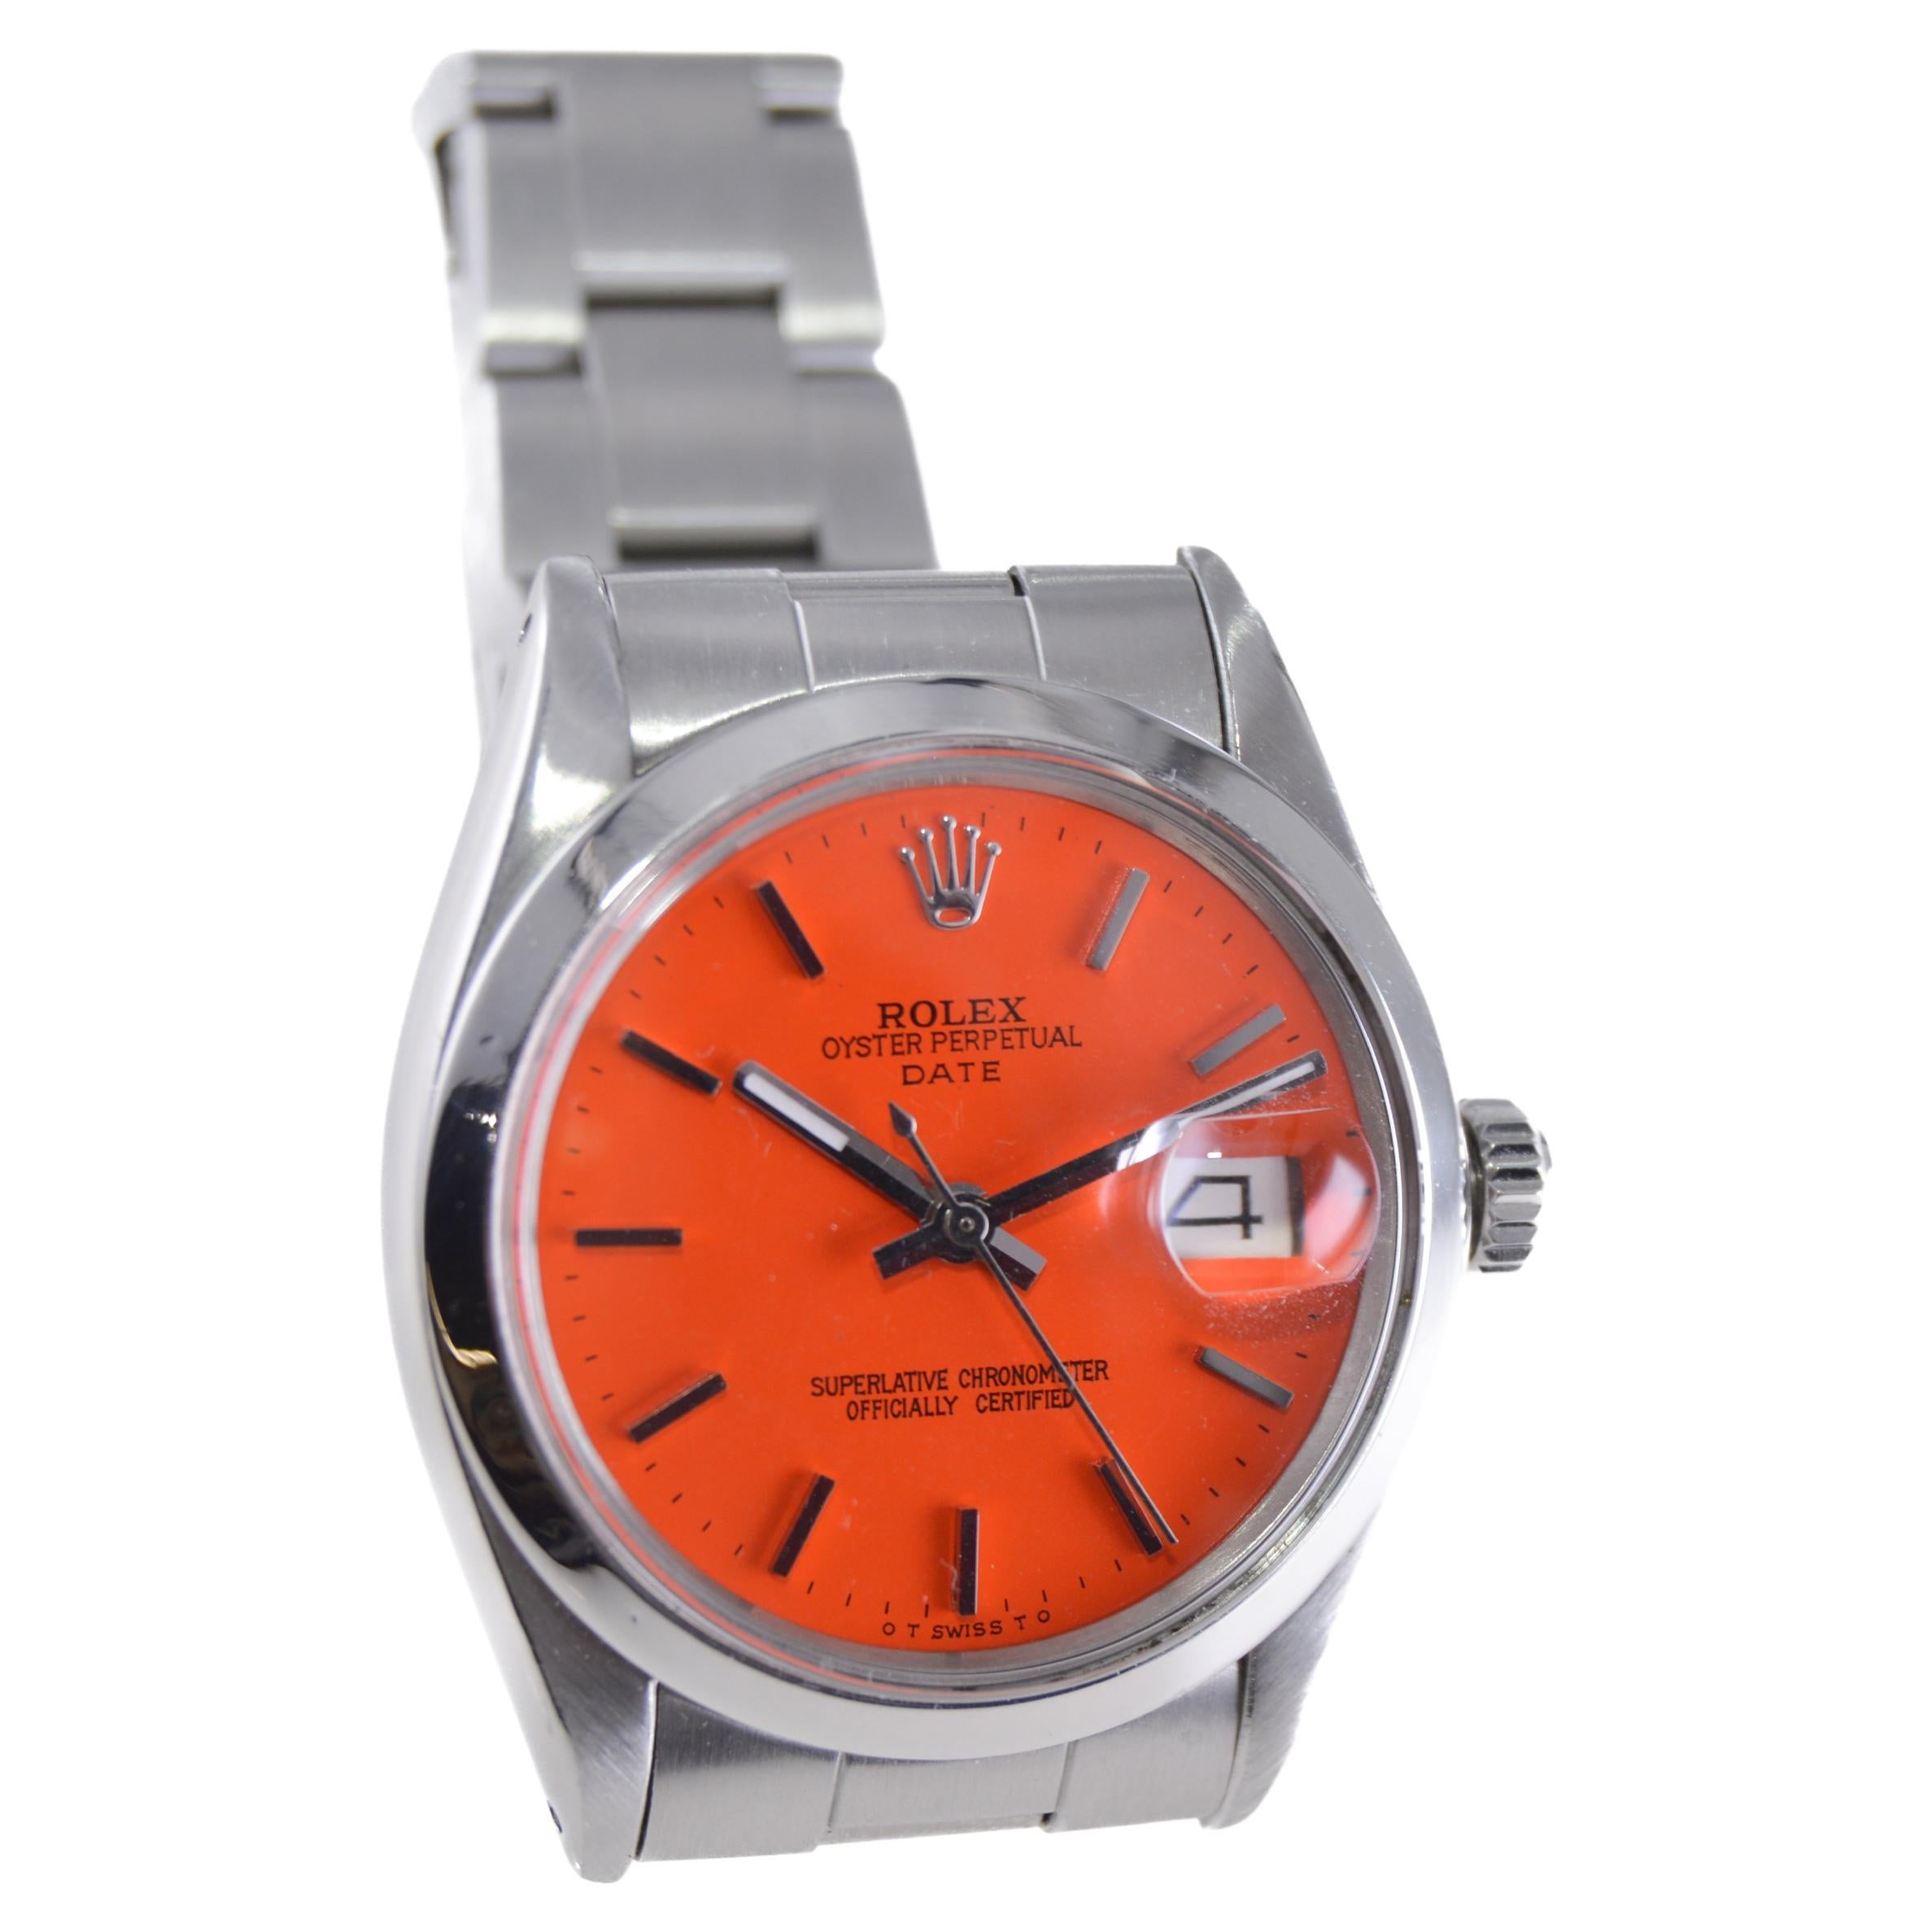 Rolex Stainless Steel Oyster Perpetual Date with Custom Orange Dial 1970s In Excellent Condition For Sale In Long Beach, CA